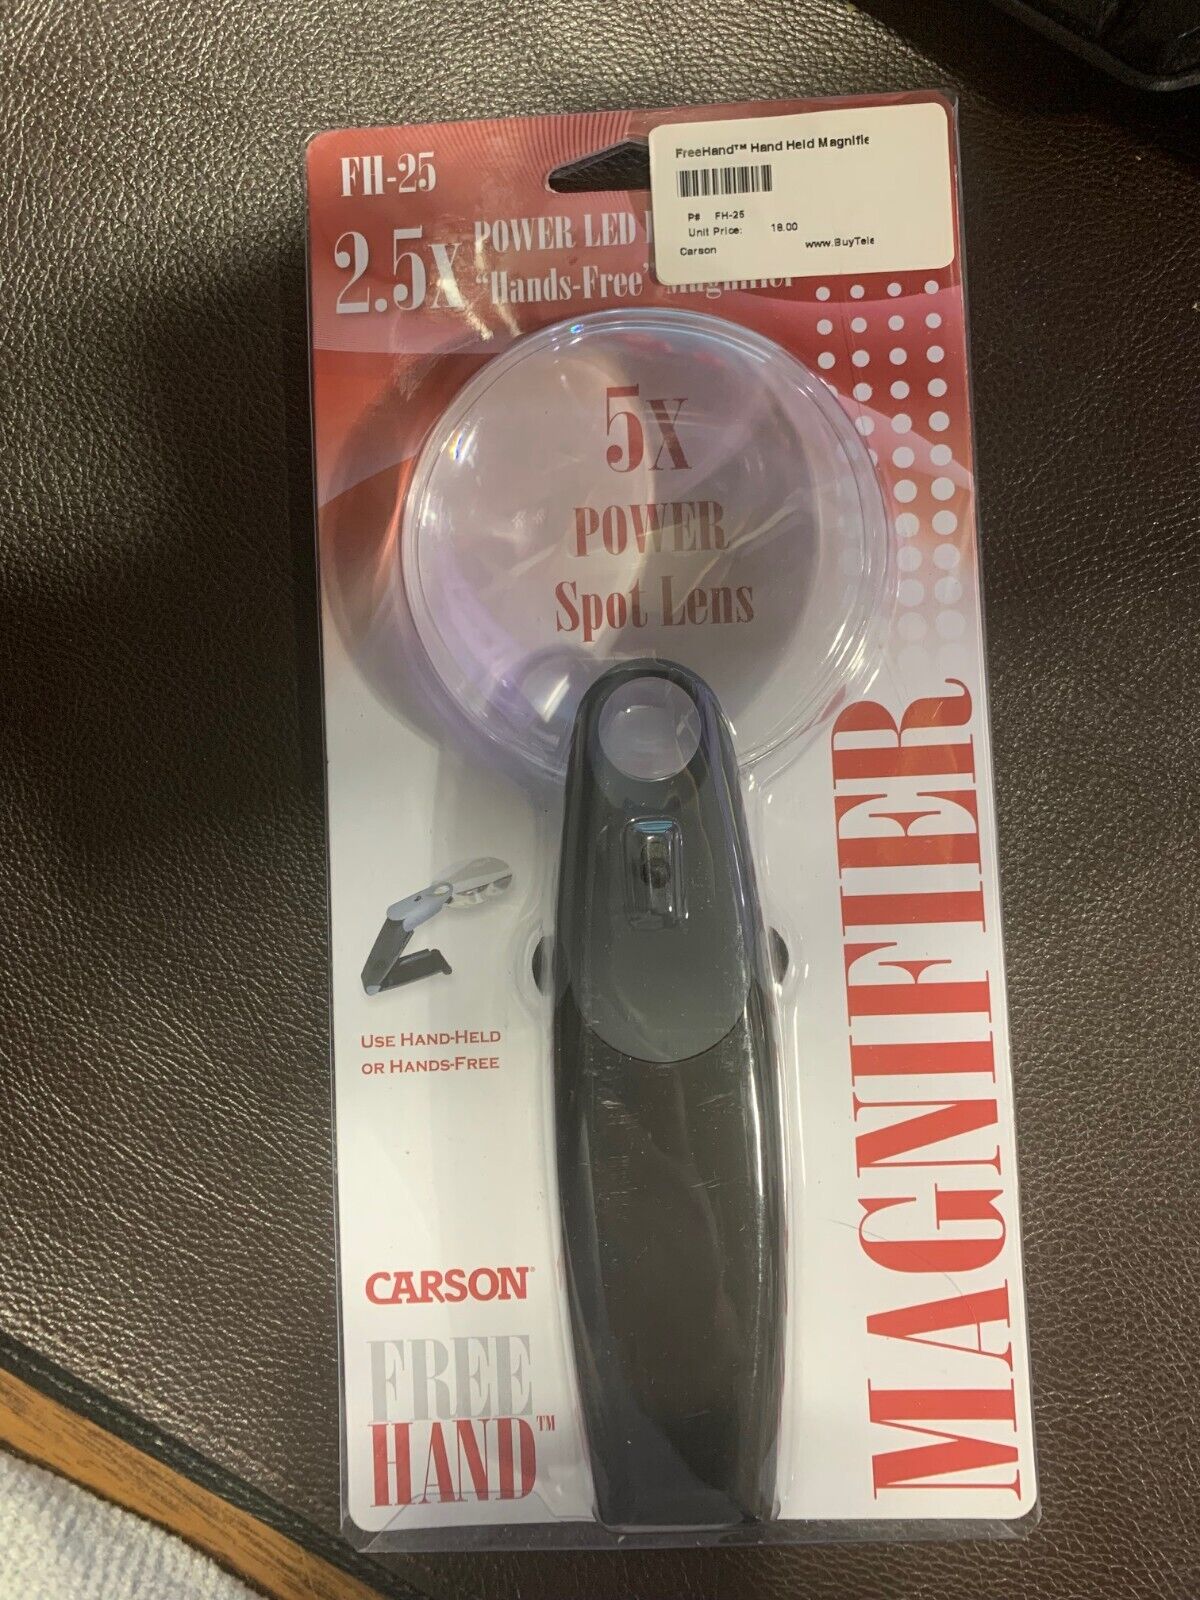 Carson Freehand 2.5x Led "hands-free" Magnifier (fh-25)